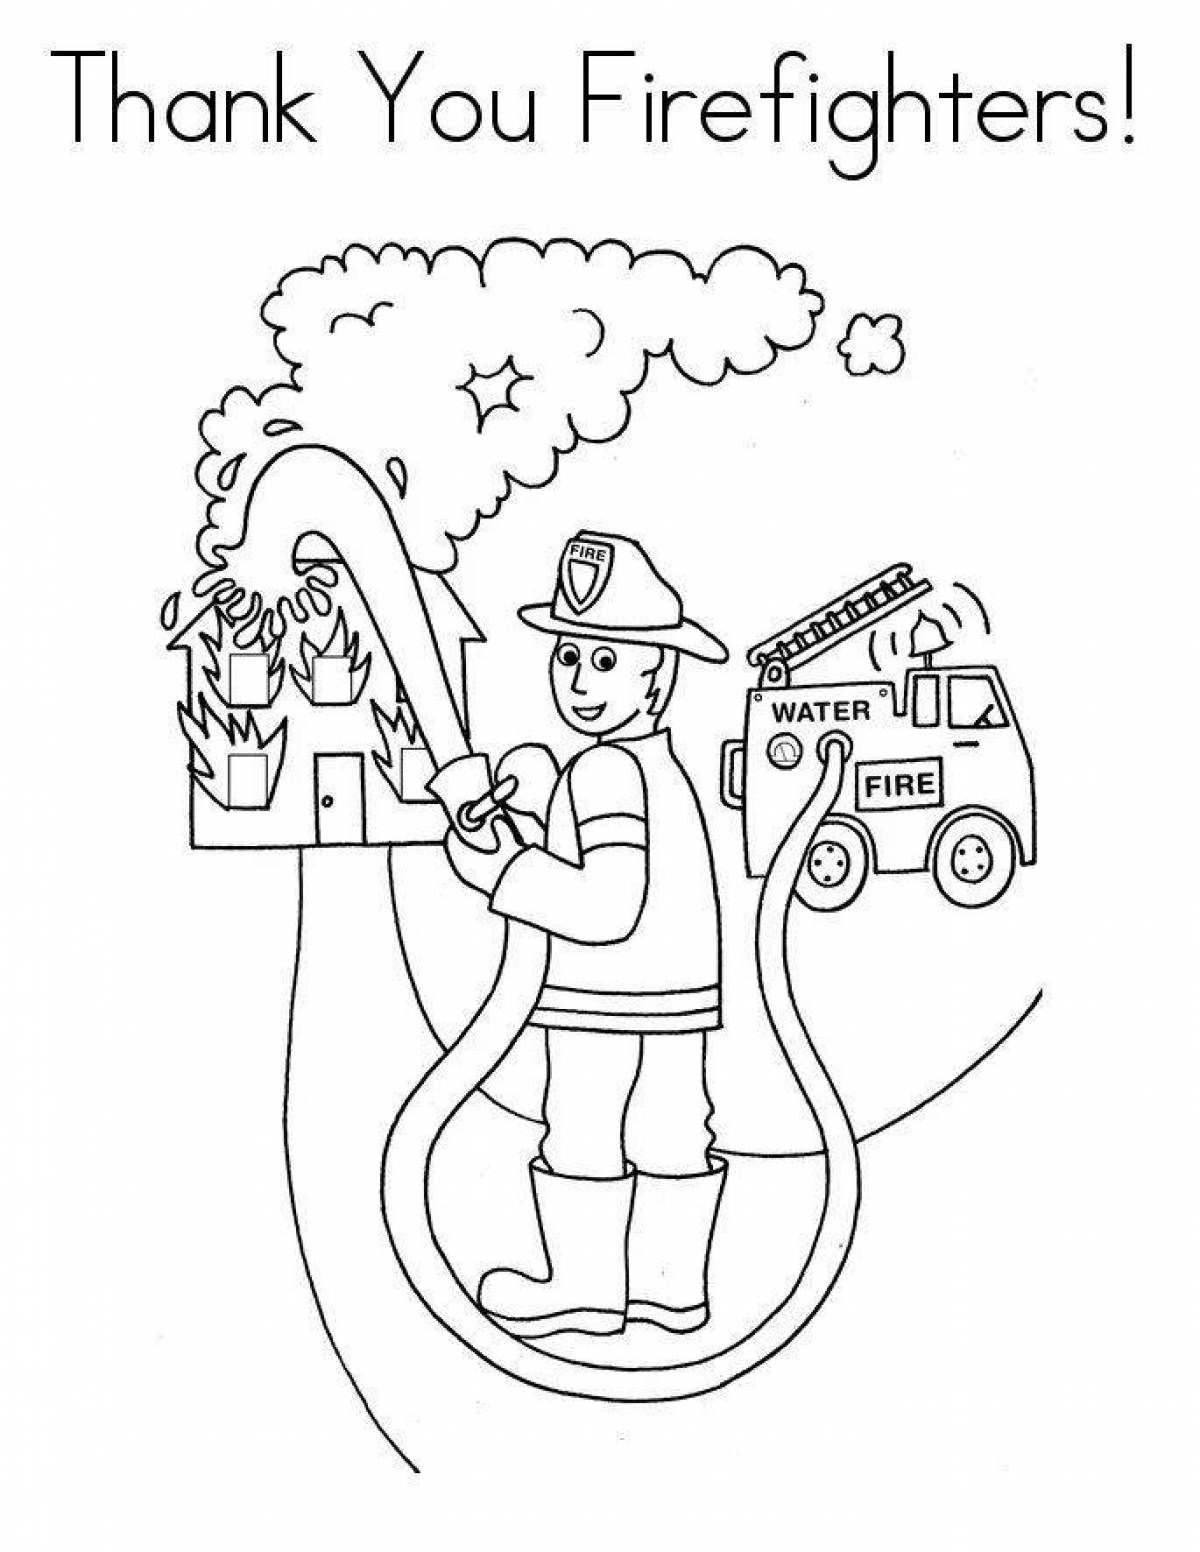 Coloring book fire safety motivation